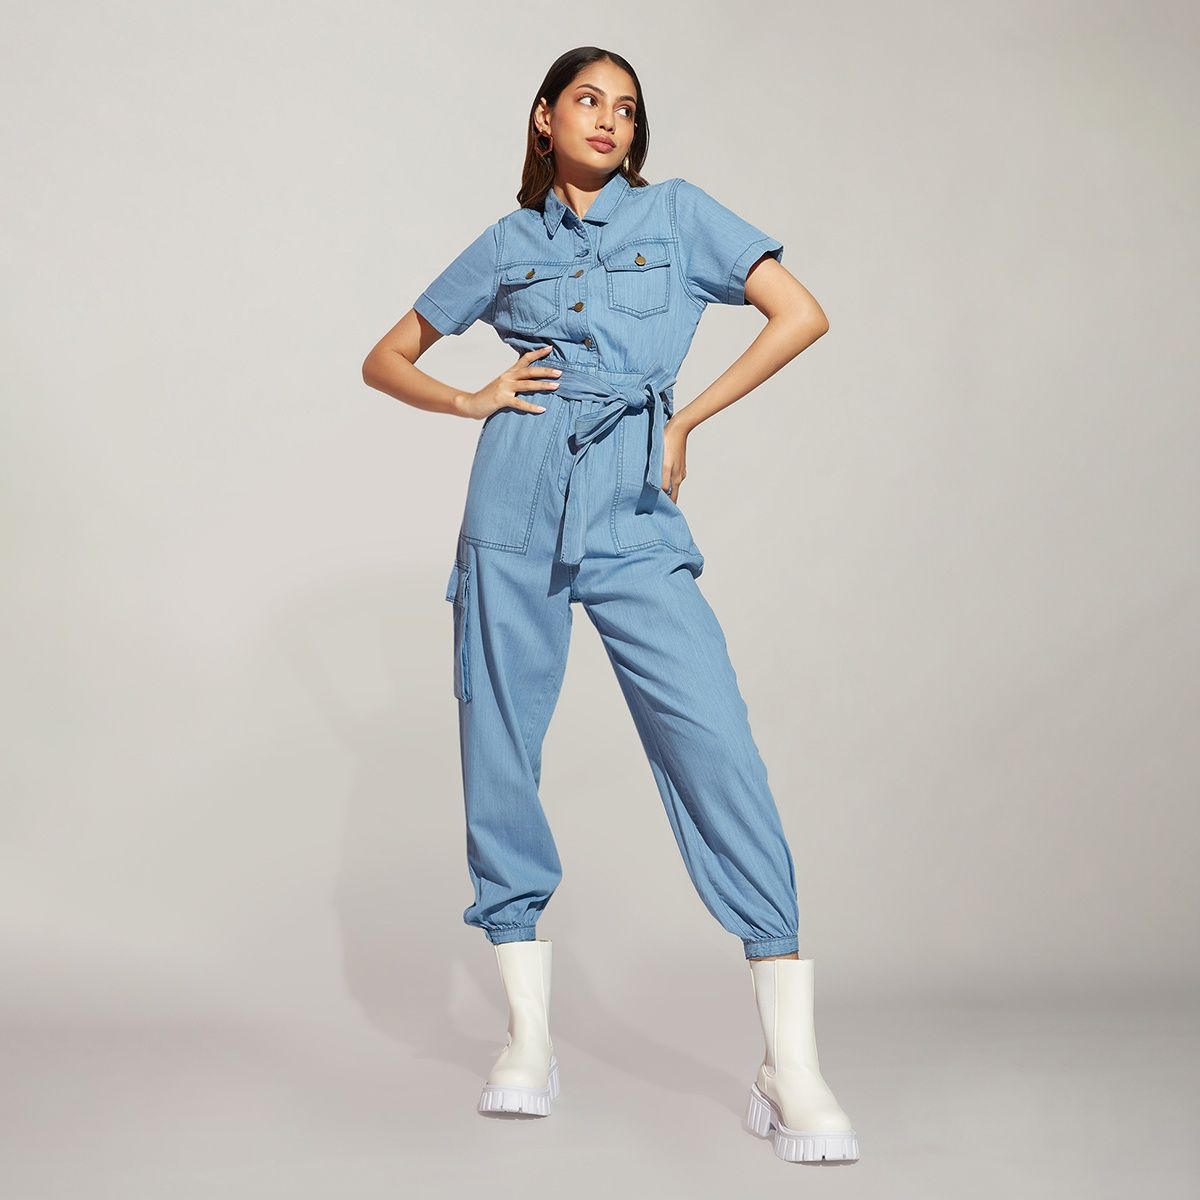 Mature woman wearing denim jumpsuit - a Royalty Free Stock Photo from  Photocase